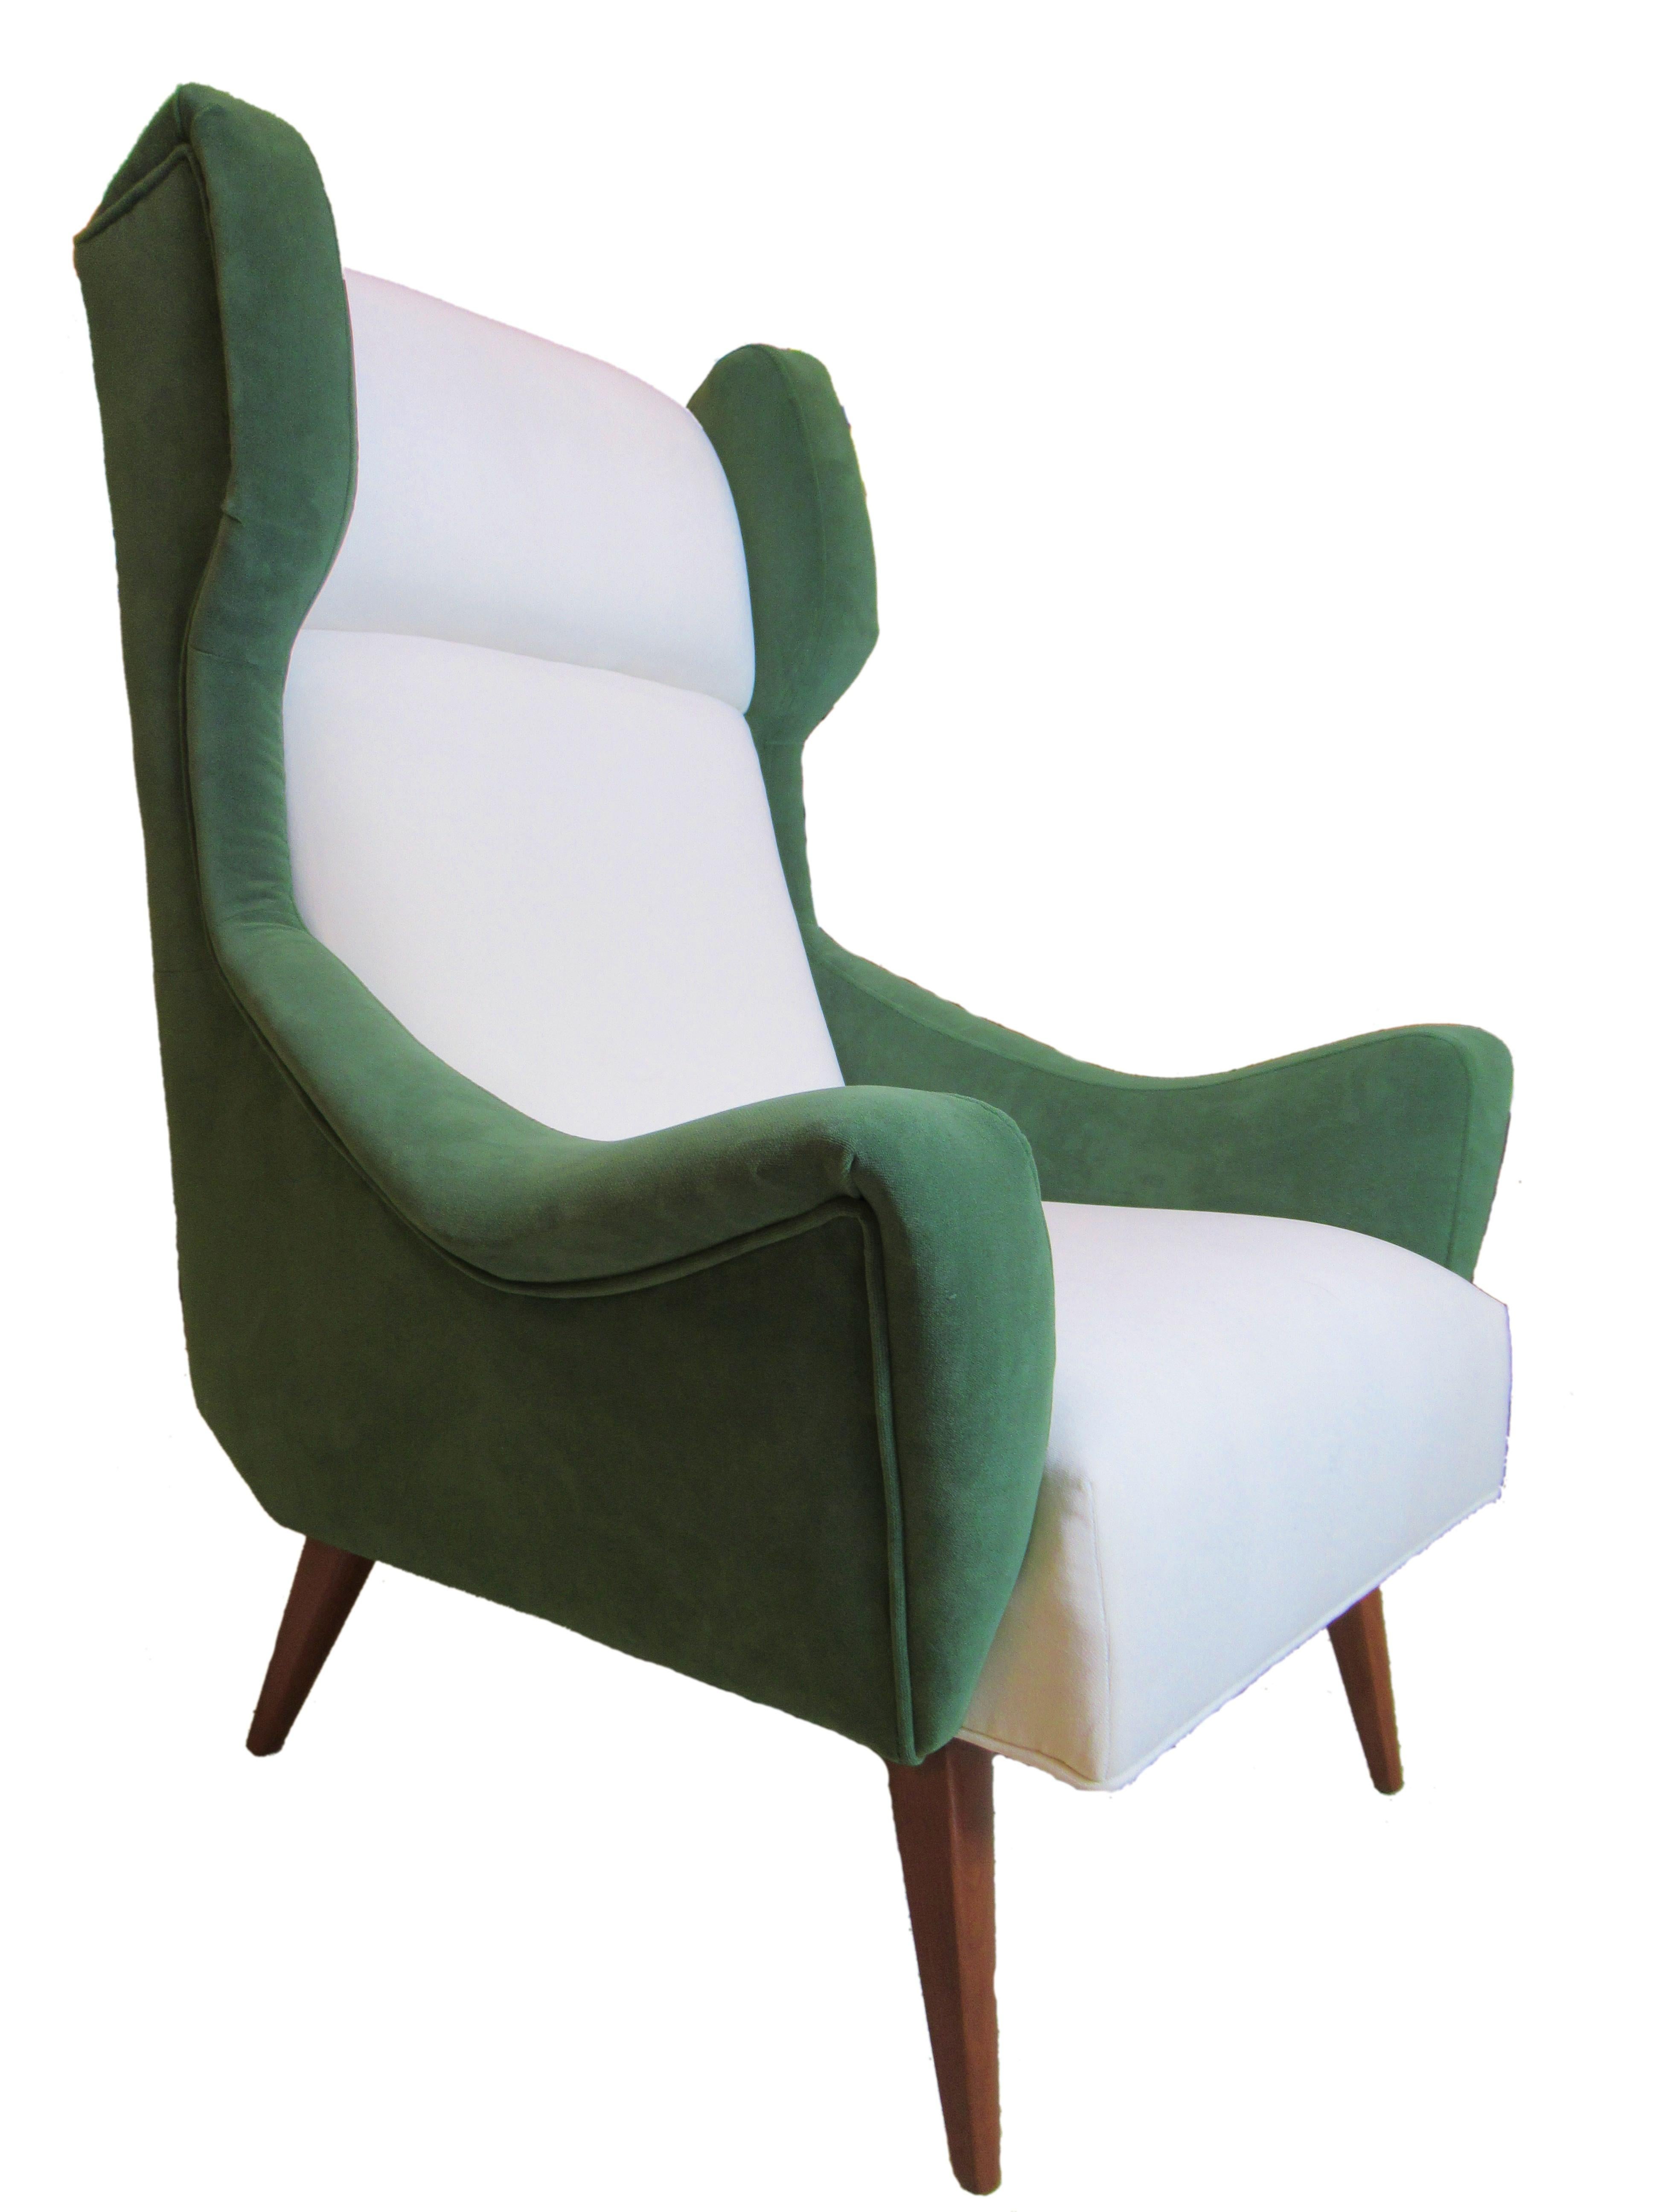 Mid-Century Modern Italian Modern Upholstered Wing Chair, Gio Ponti, 1950's For Sale